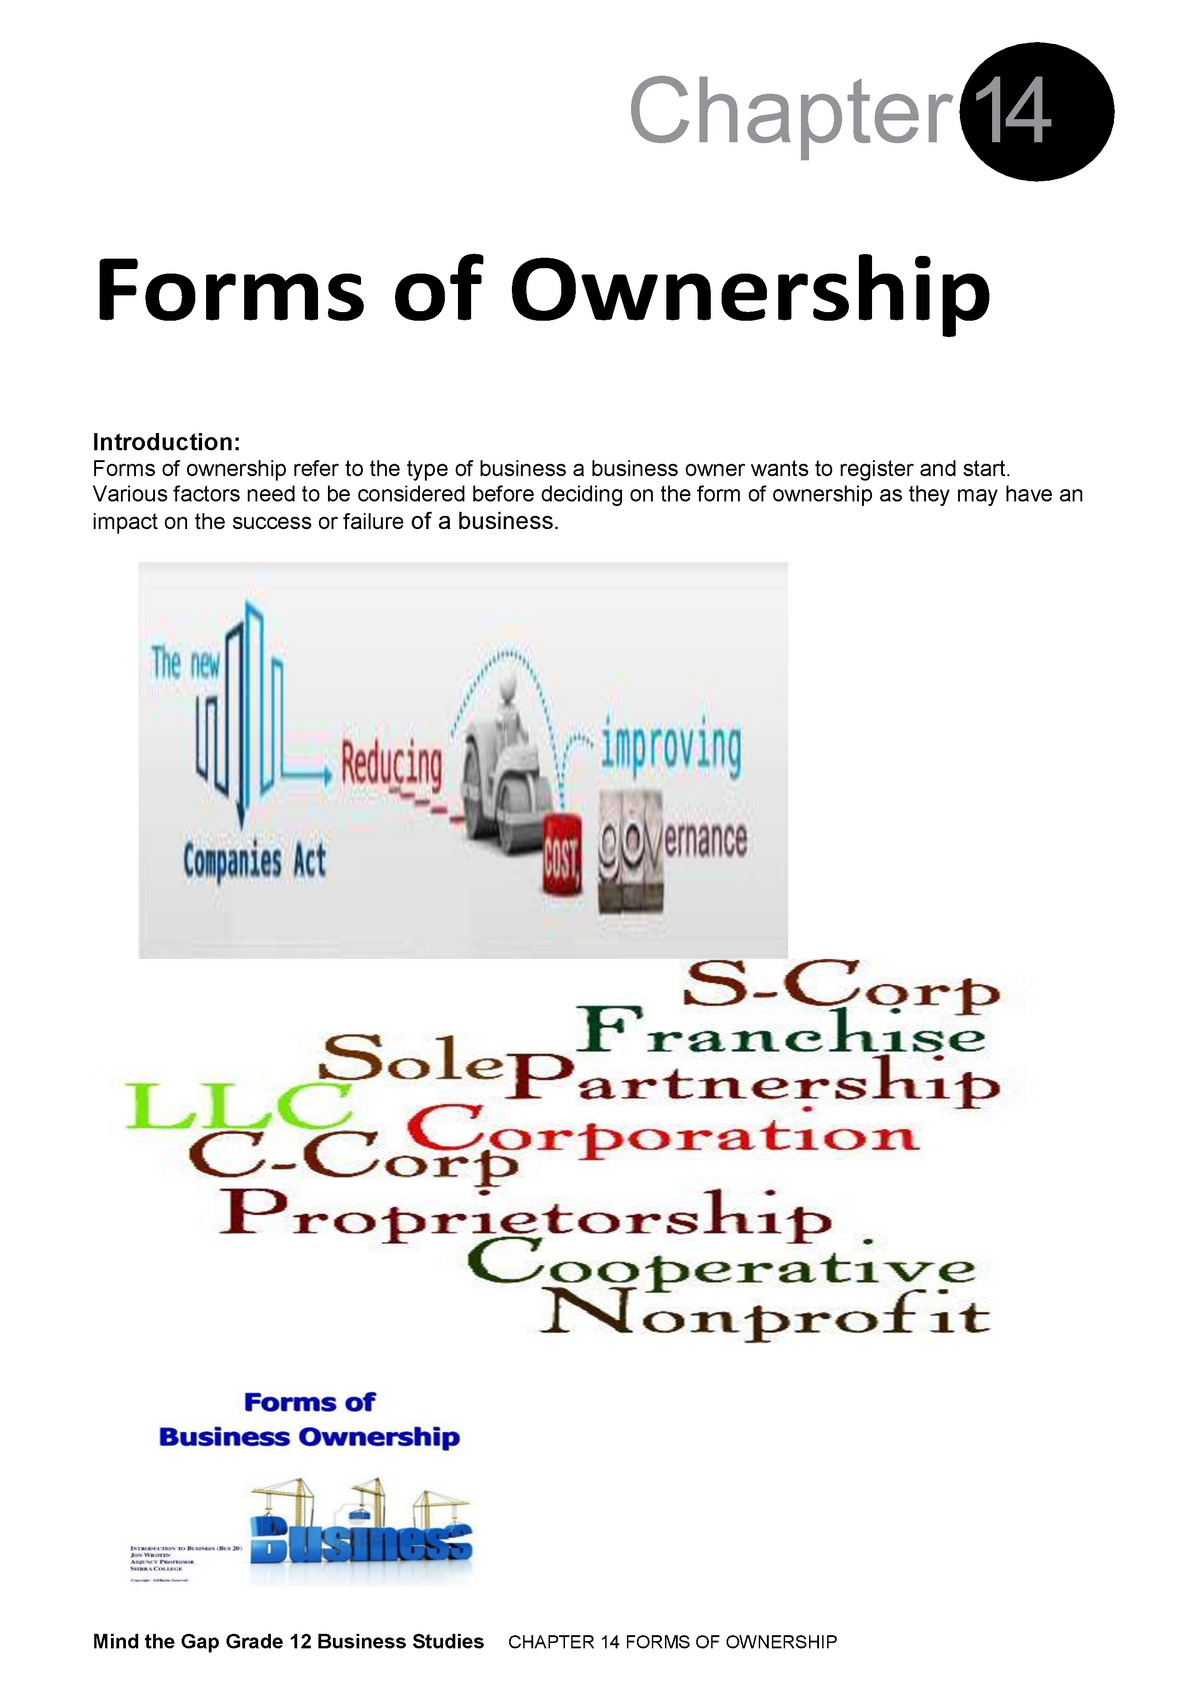 various forms of ownership